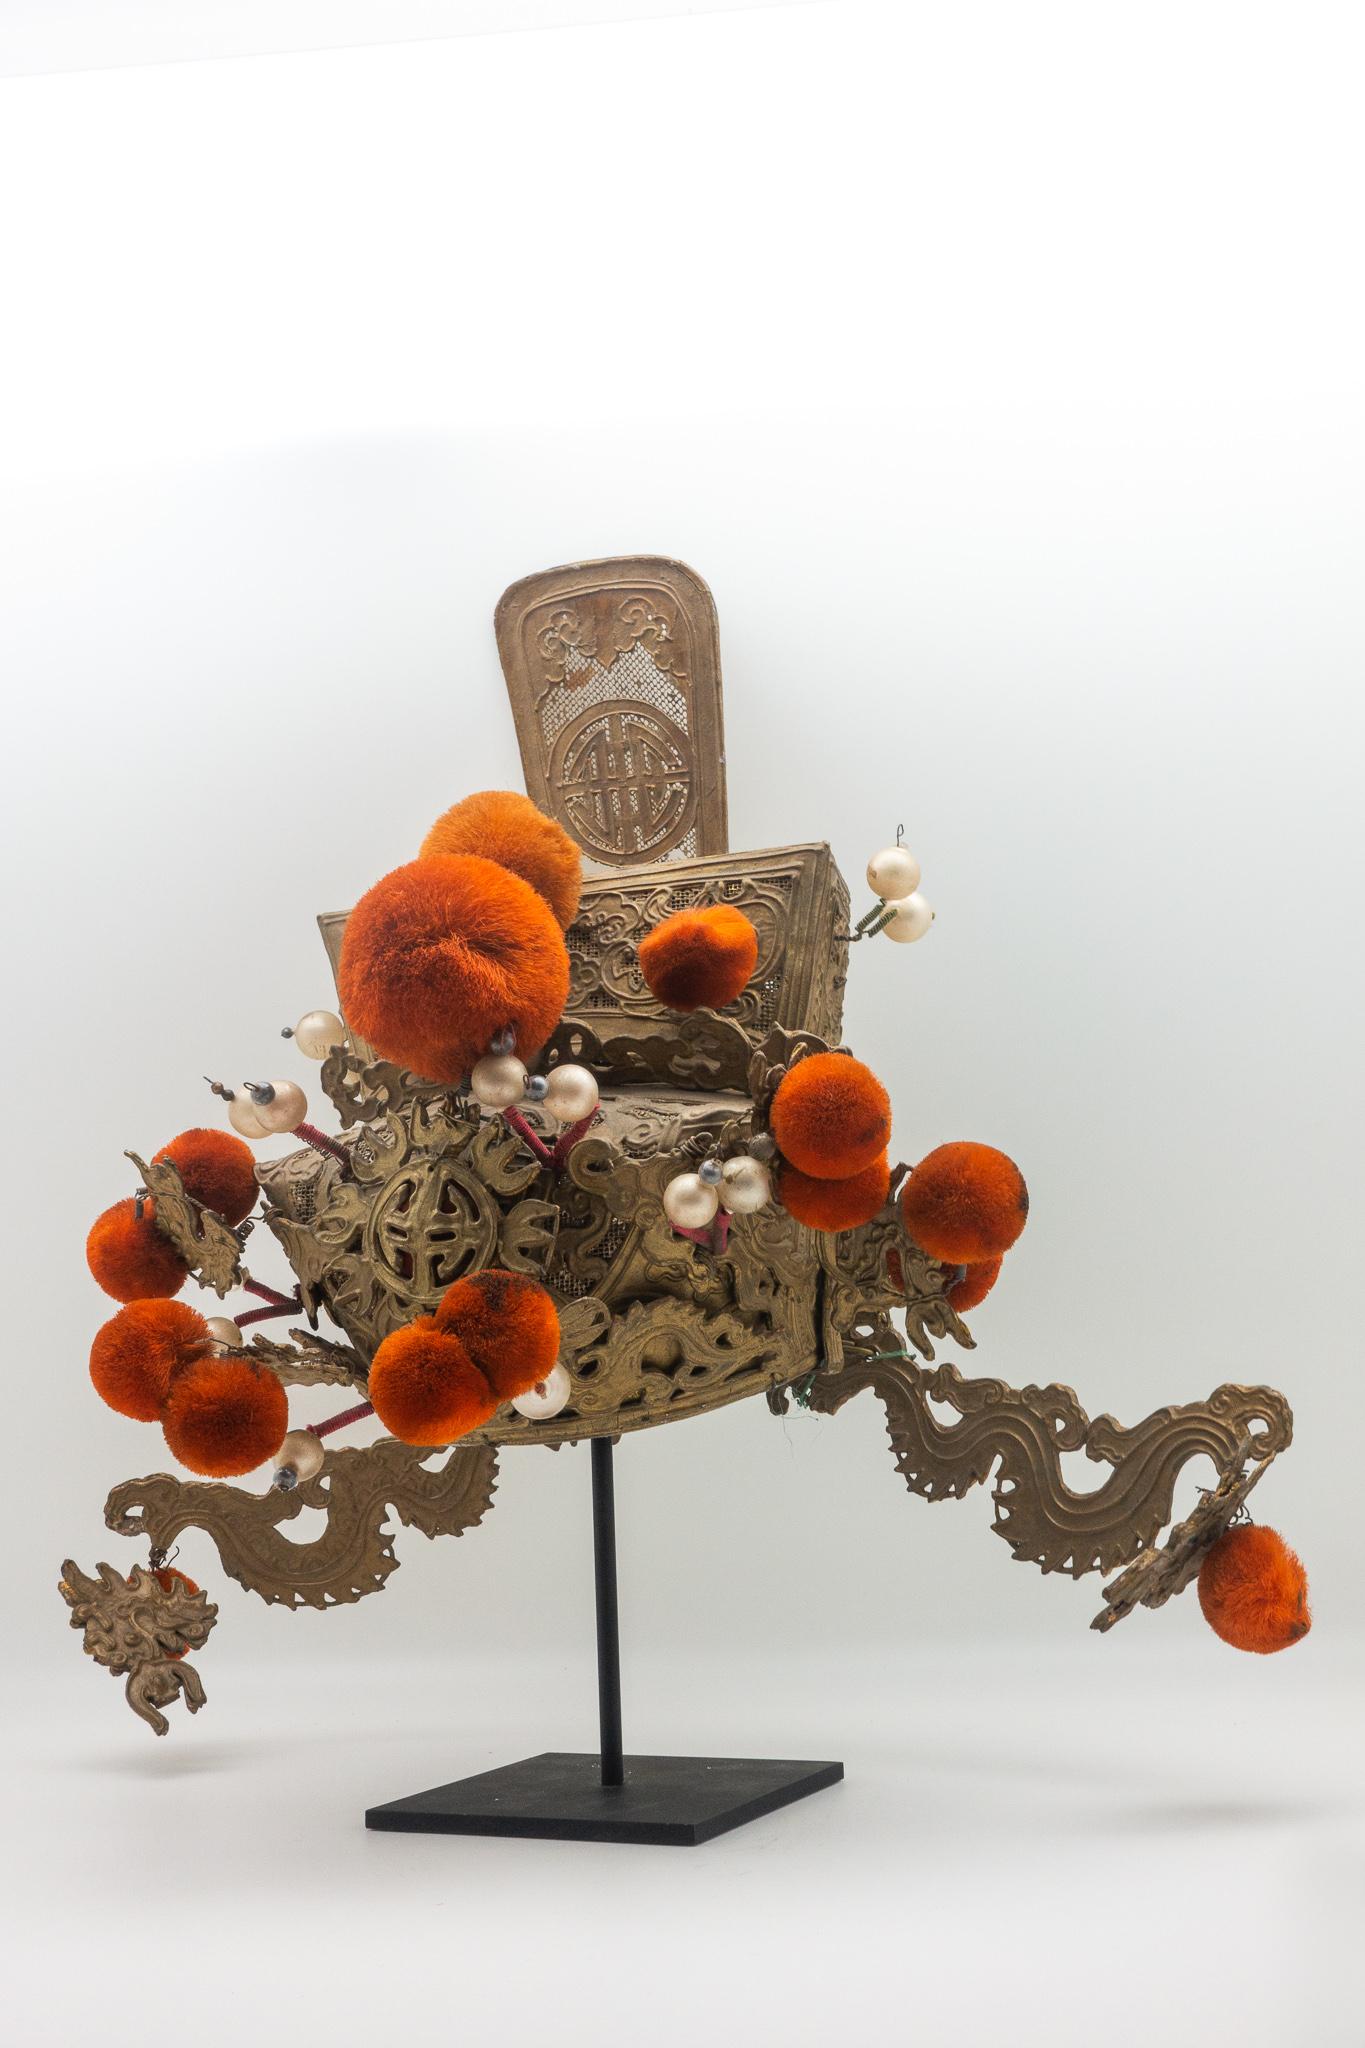 Vintage Chinese opera theatre headdress in gold with orange pom poms.
Early 20th century, mounted on a custom, black painted metal base.